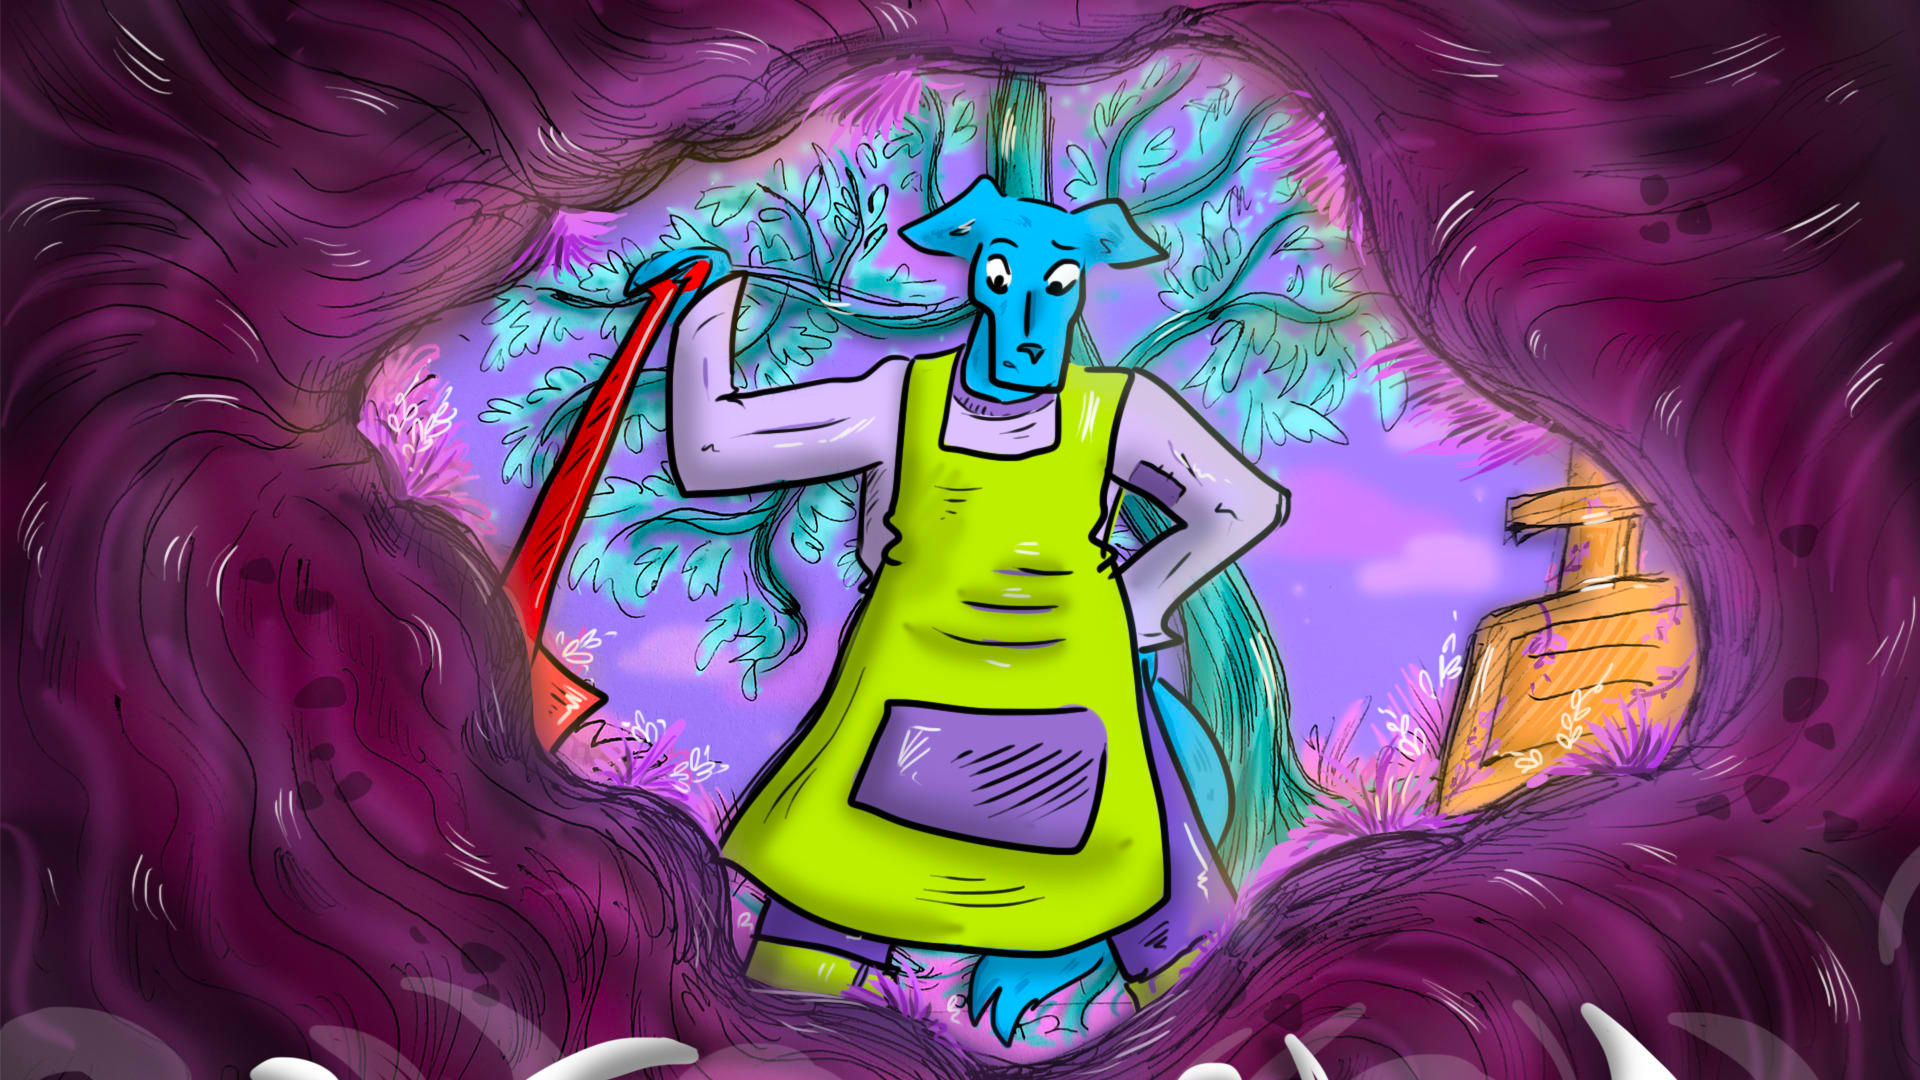 A blue anthropomorphic dog in a green tabard apron stood in the centre of the image looking into a curved purple opening, which borders the whole the image.